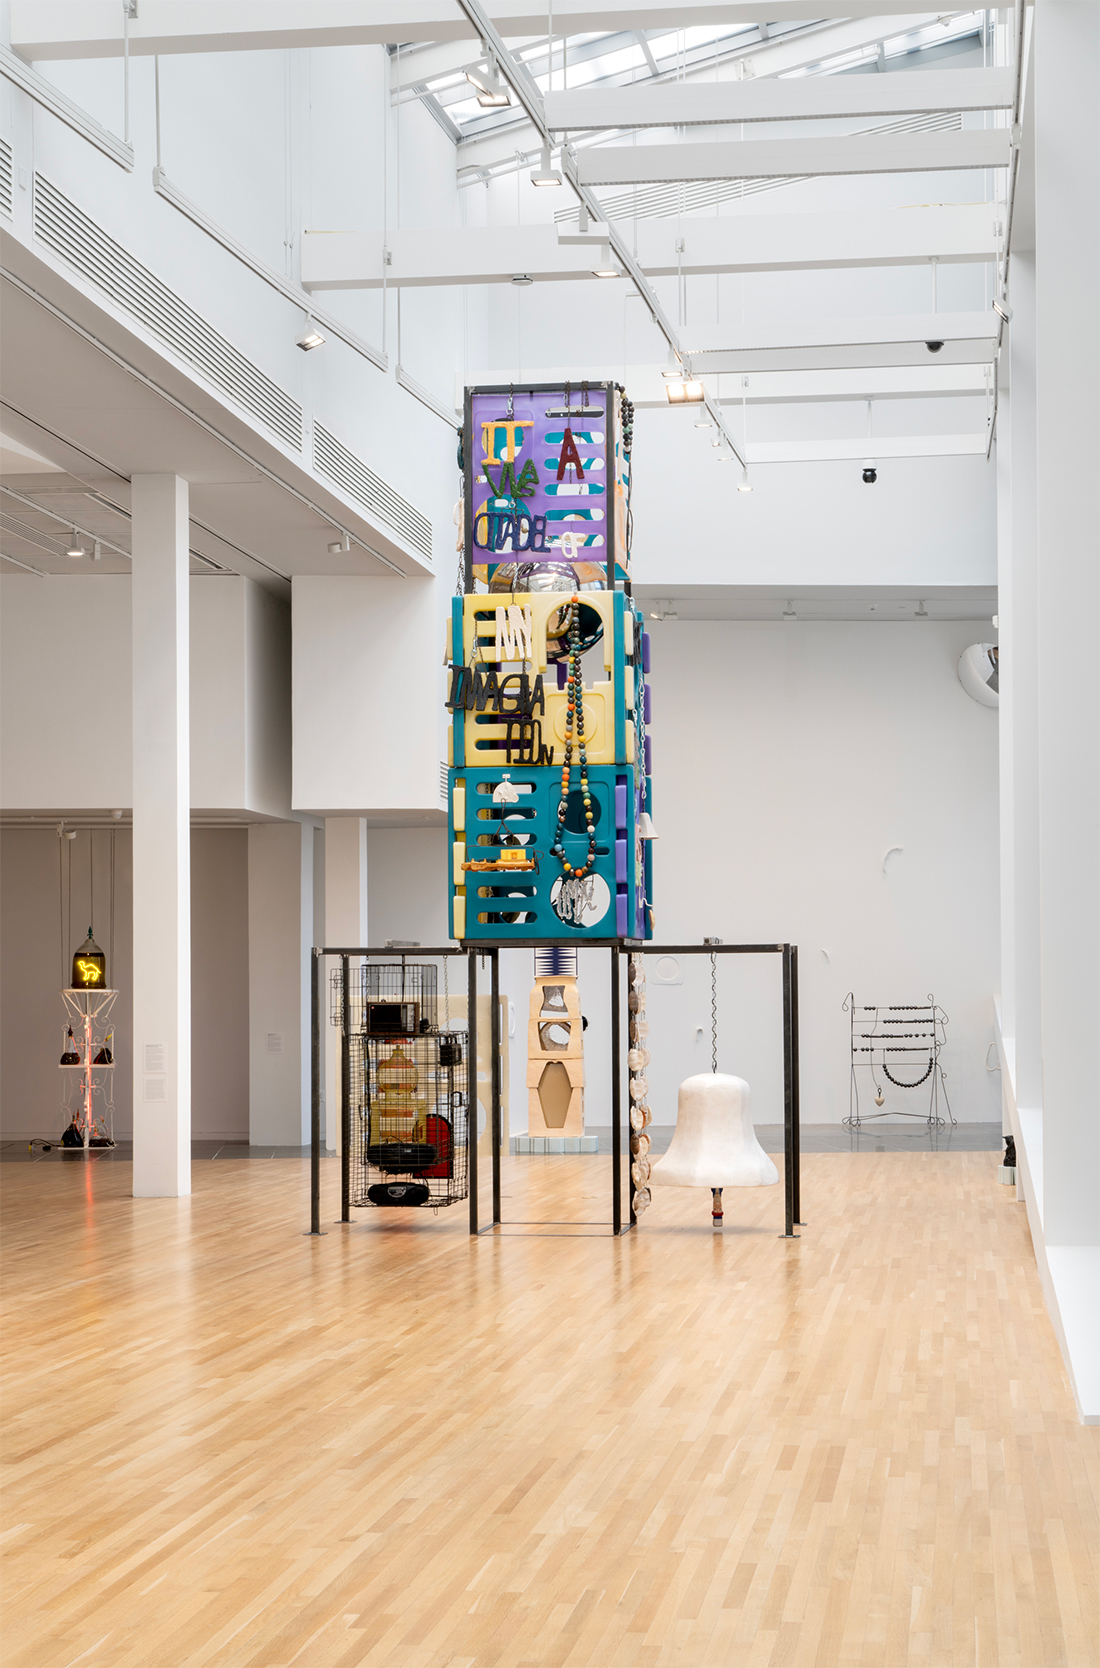 Upright, four-tier multicolored sculpture with ornaments, including text, beads, cages with radios, and ceramic bell, with ceramic pita curtain.